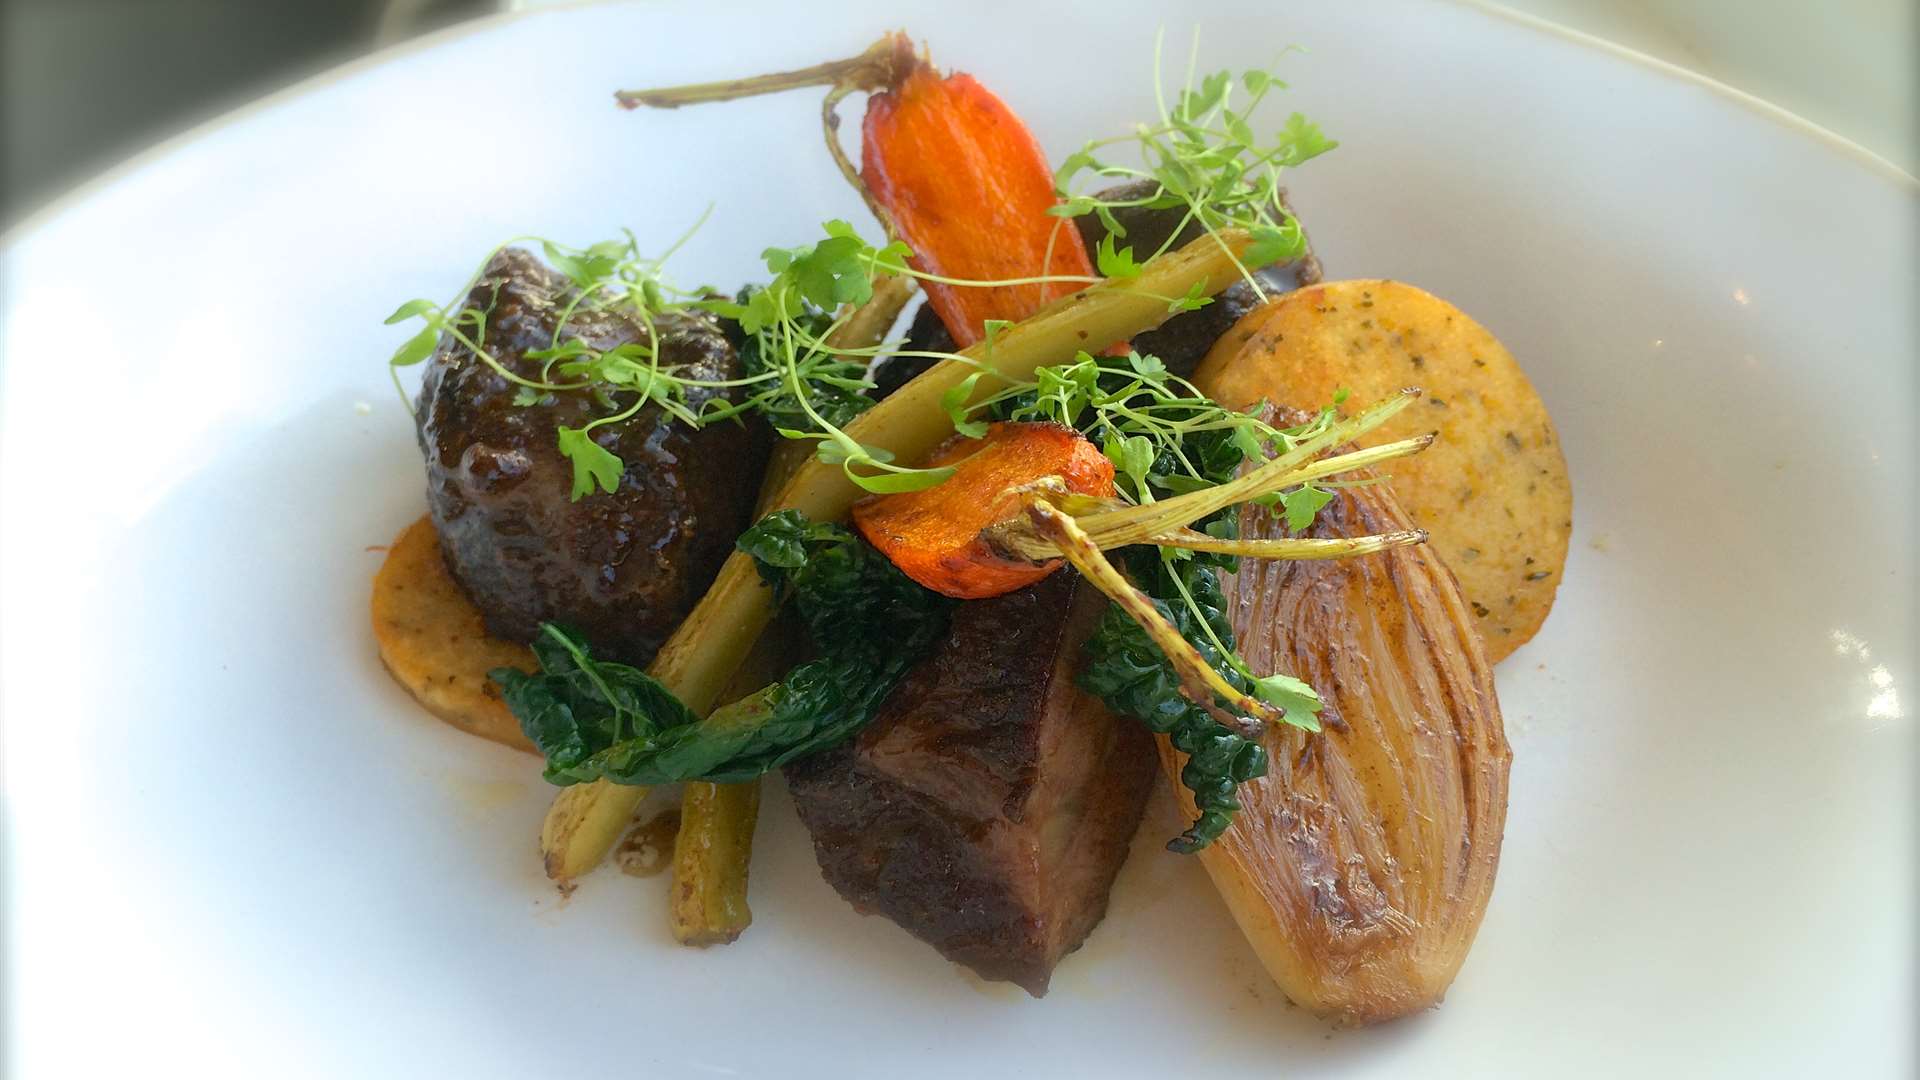 Braised ox cheeks on the menu at Saltwood on the Green in Hythe